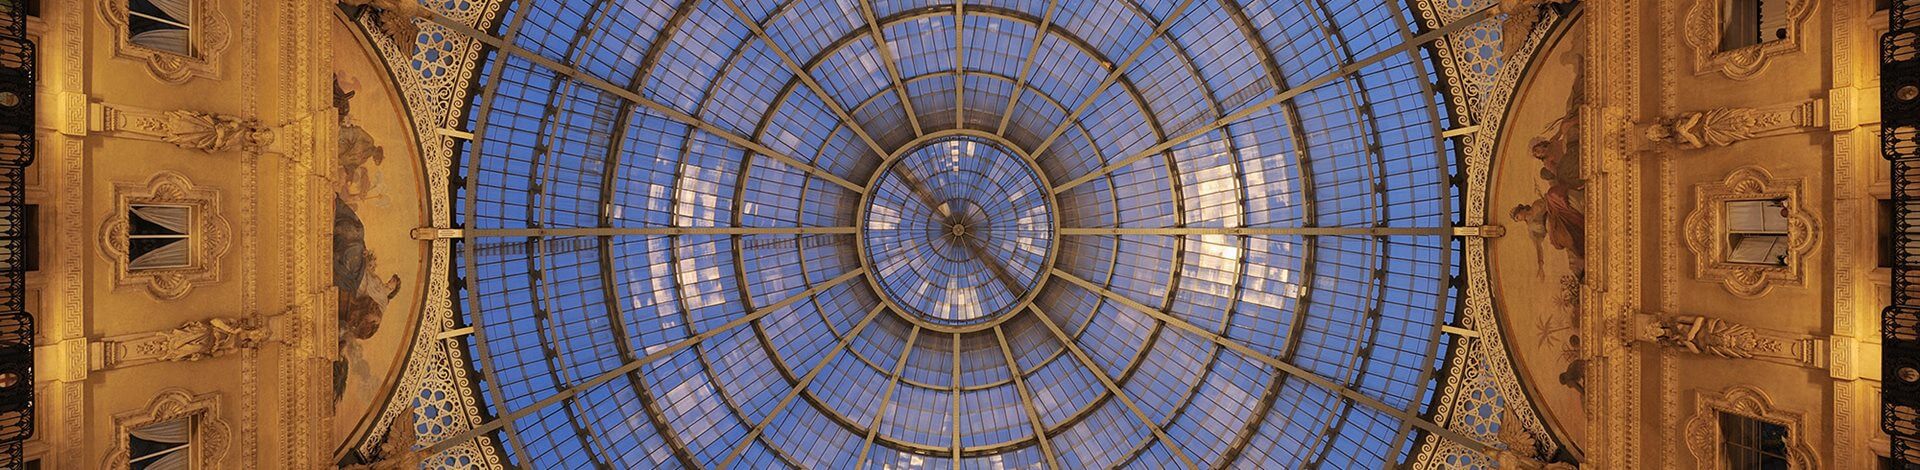 View of glass dome from beneath in Galleria Vittorio Emanuele II